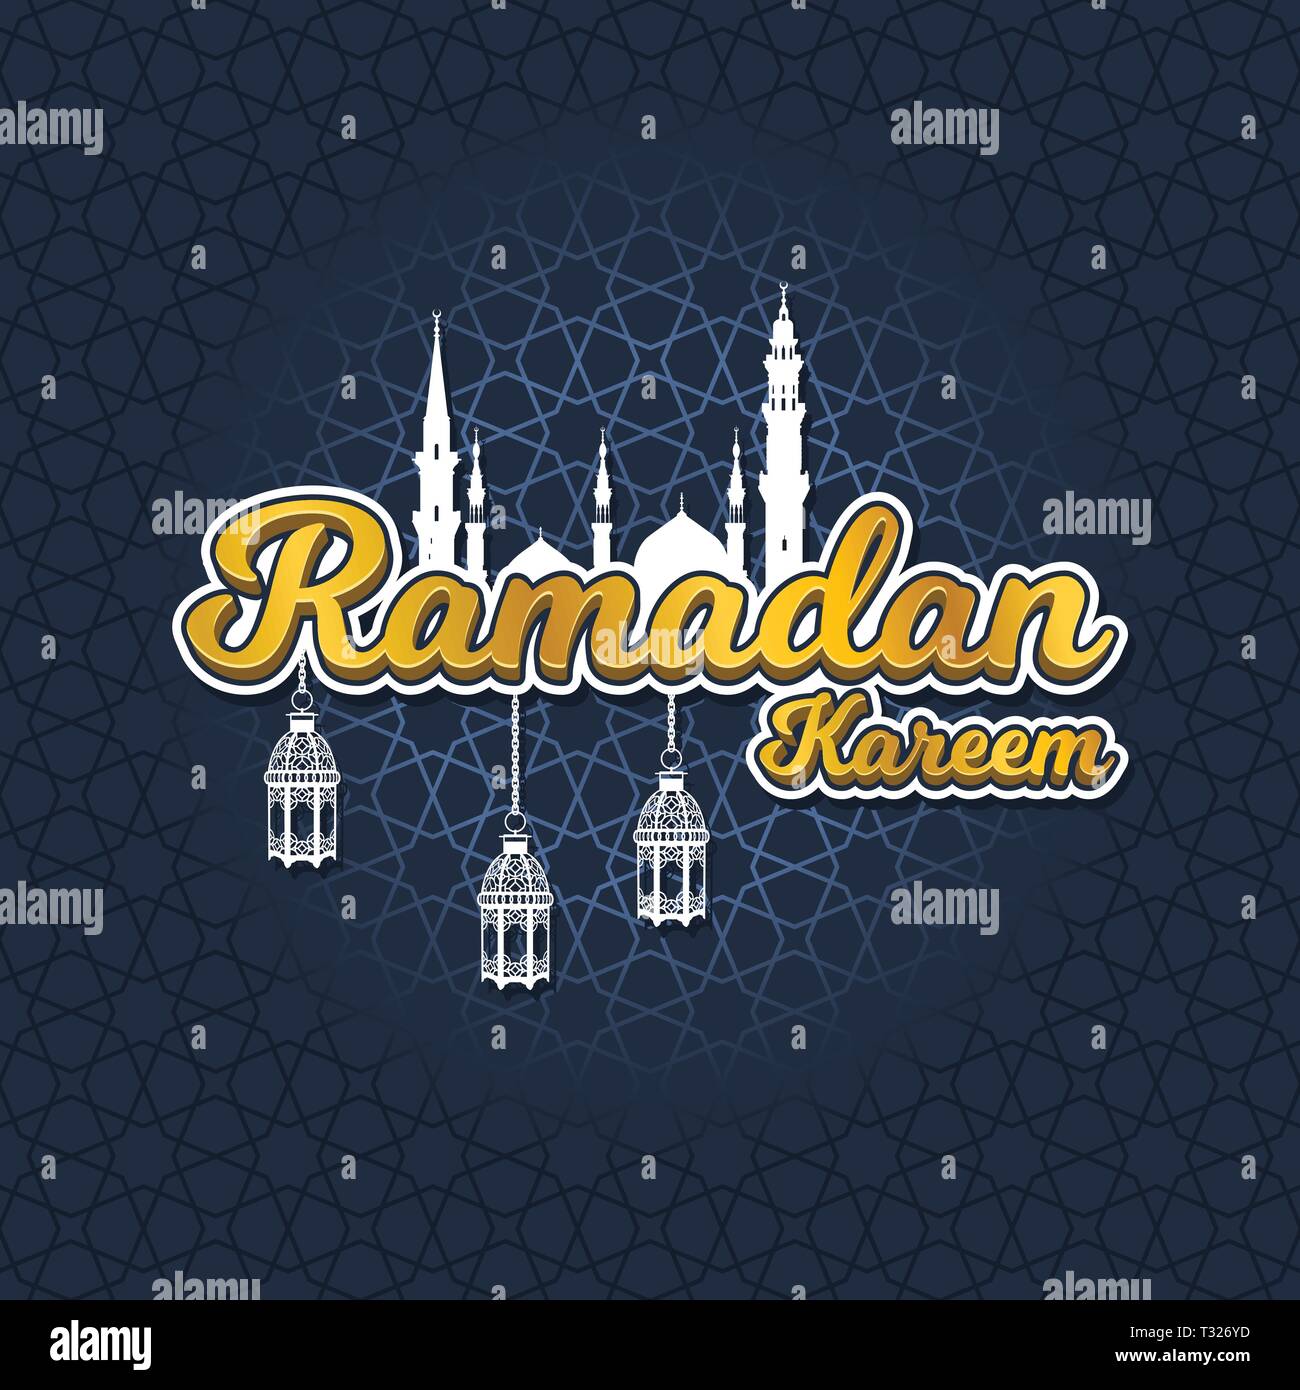 Islamic Greeting Card Design, Golden Ramadan Kareem in Cartoon 3D Word with Silhouette of Prophet Muhammad's Mosque and Lantern Elements Stock Vector